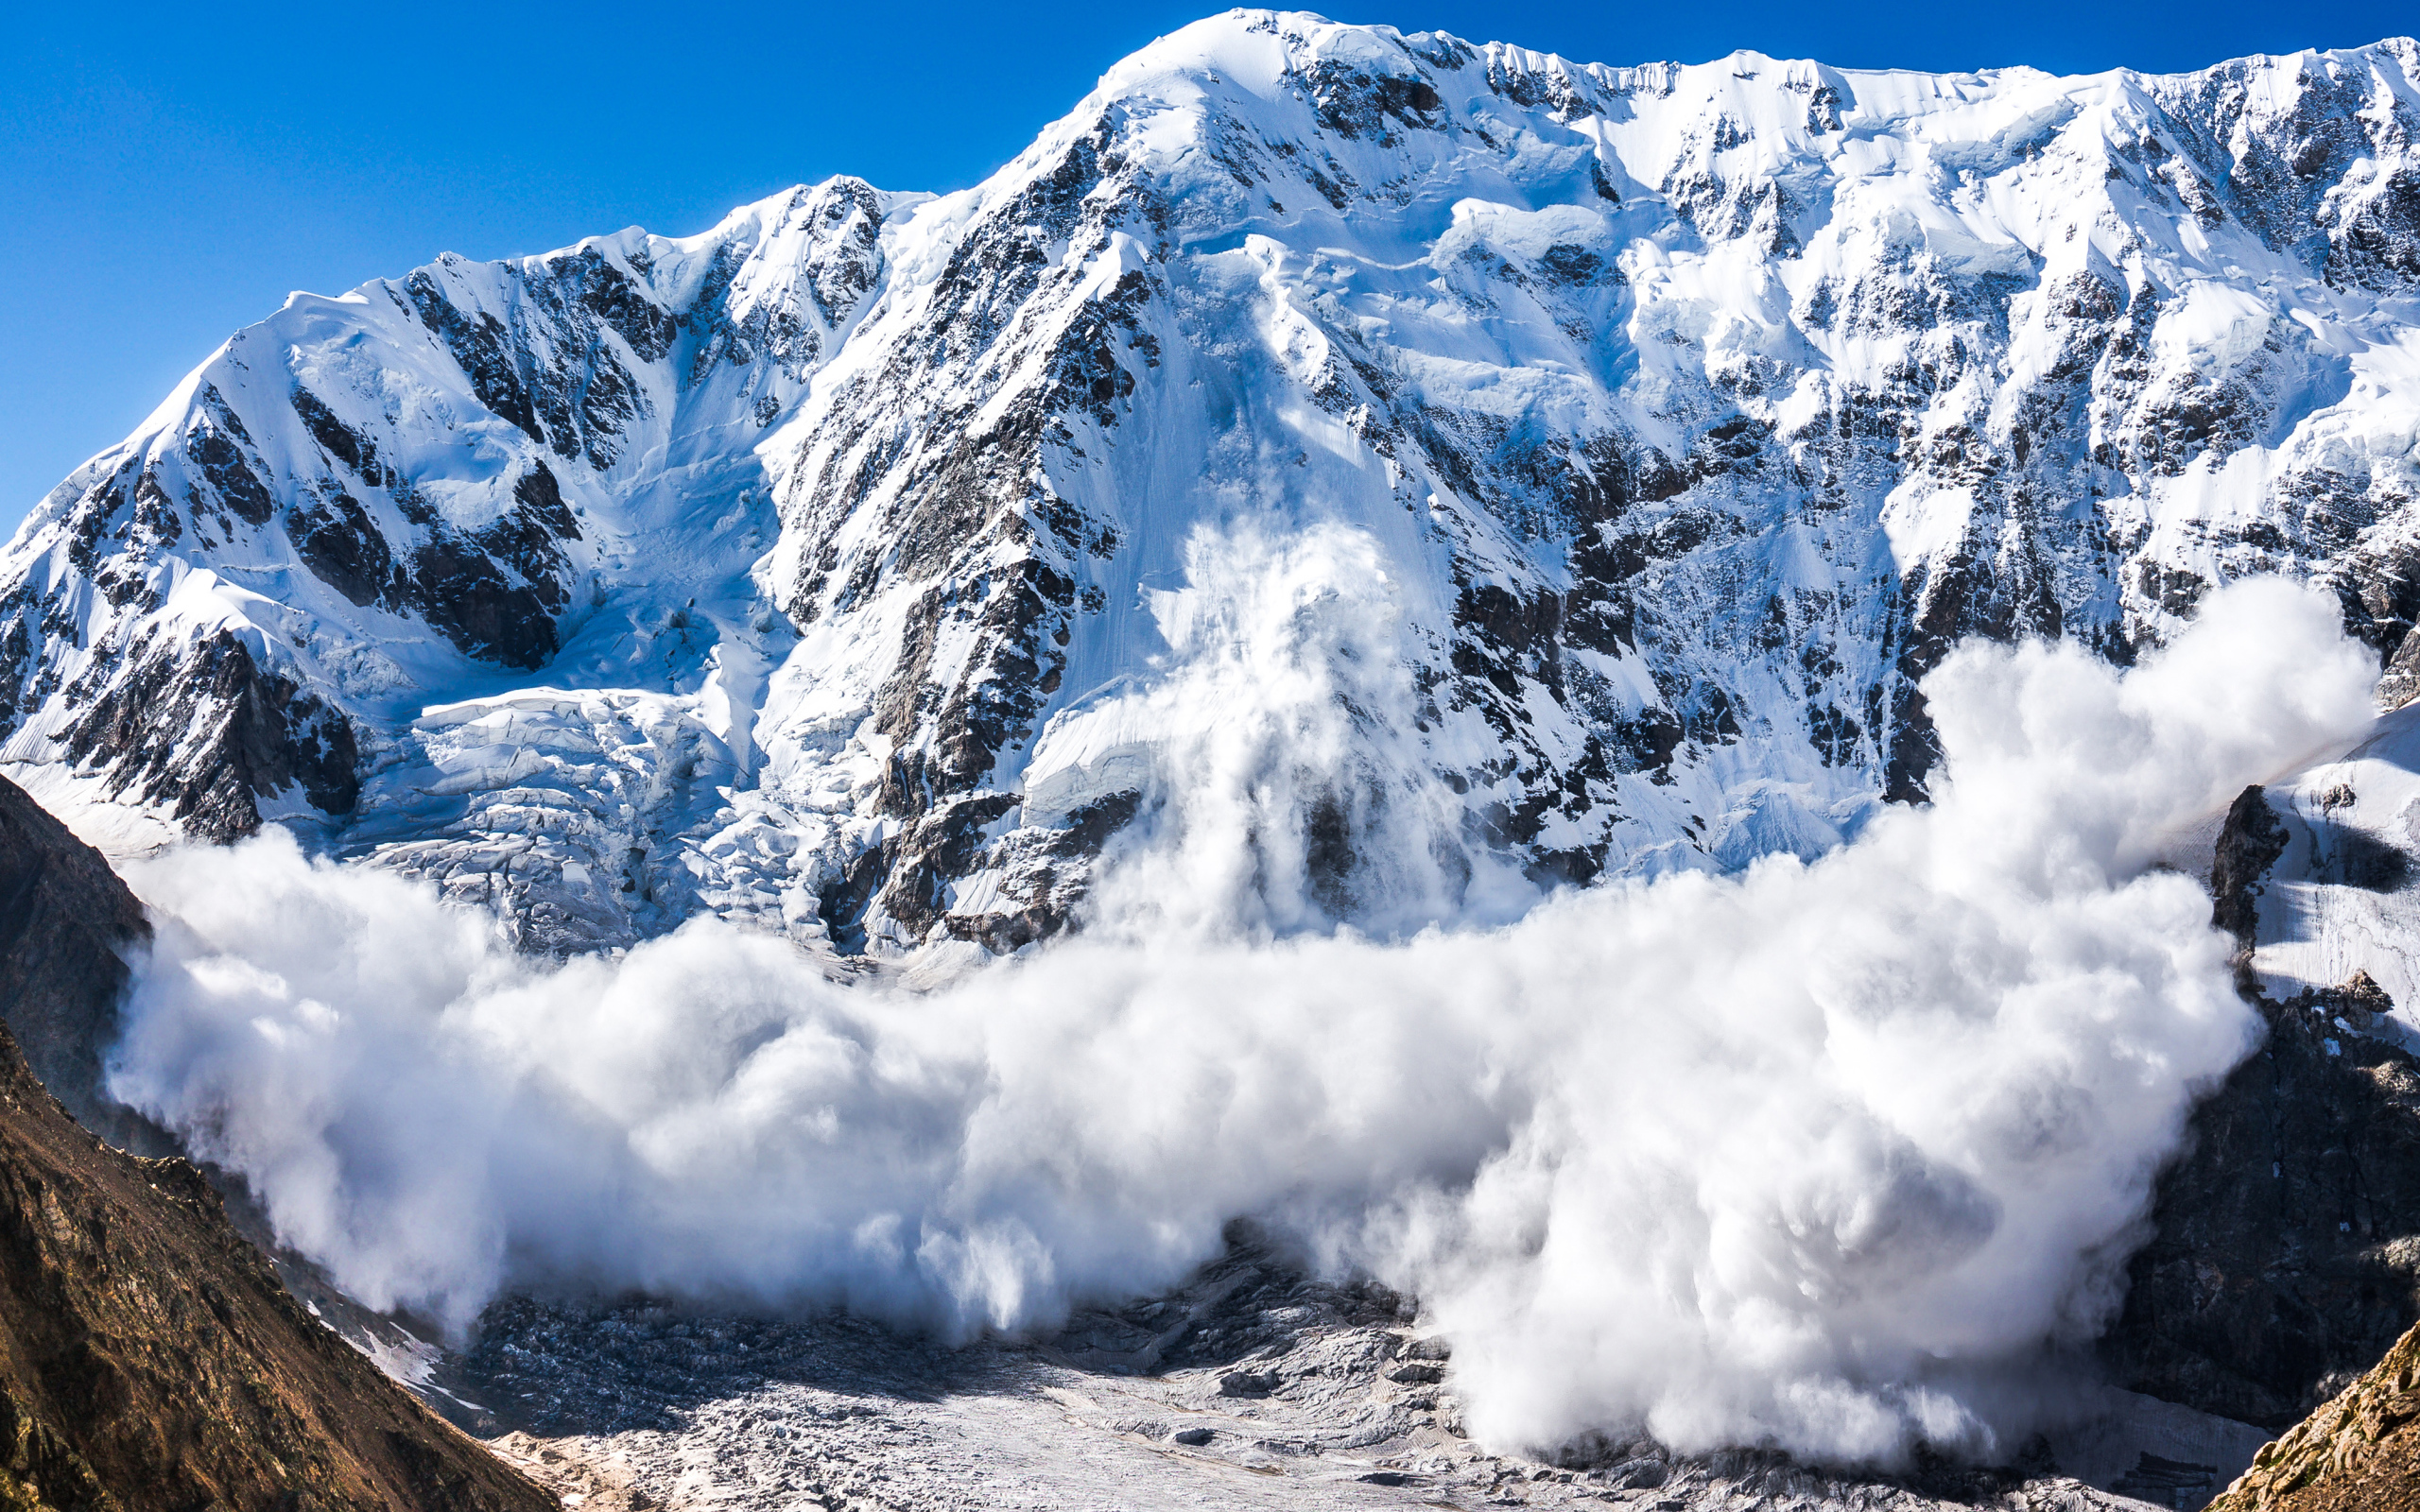 Snow avalanche coming out of the snowy Alps, Switzerland